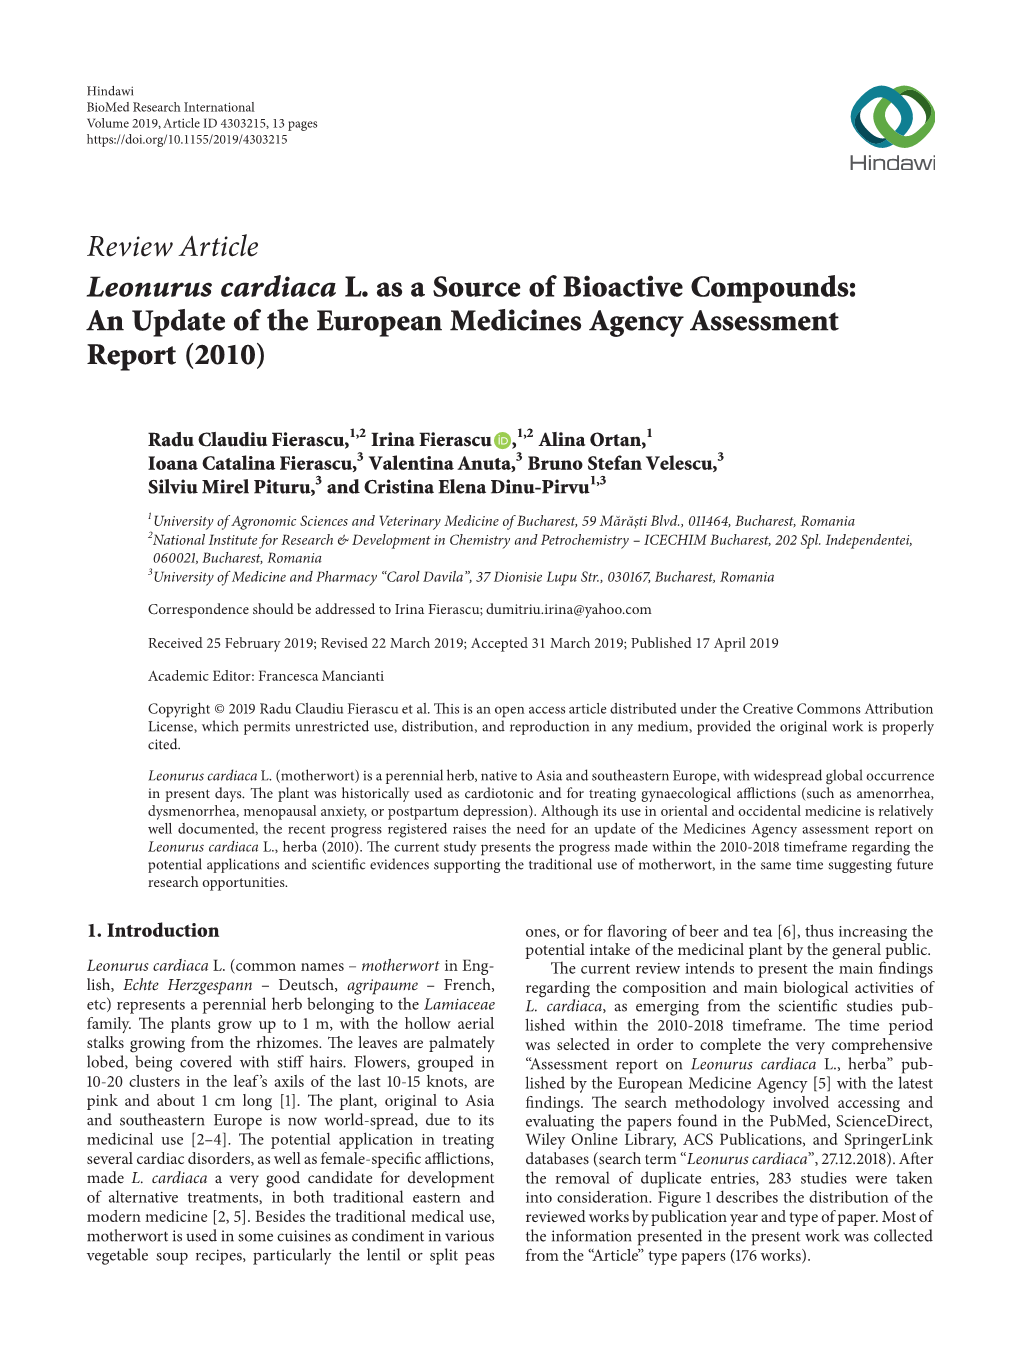 Leonurus Cardiaca L. As a Source of Bioactive Compounds: an Update of the European Medicines Agency Assessment Report (2010)